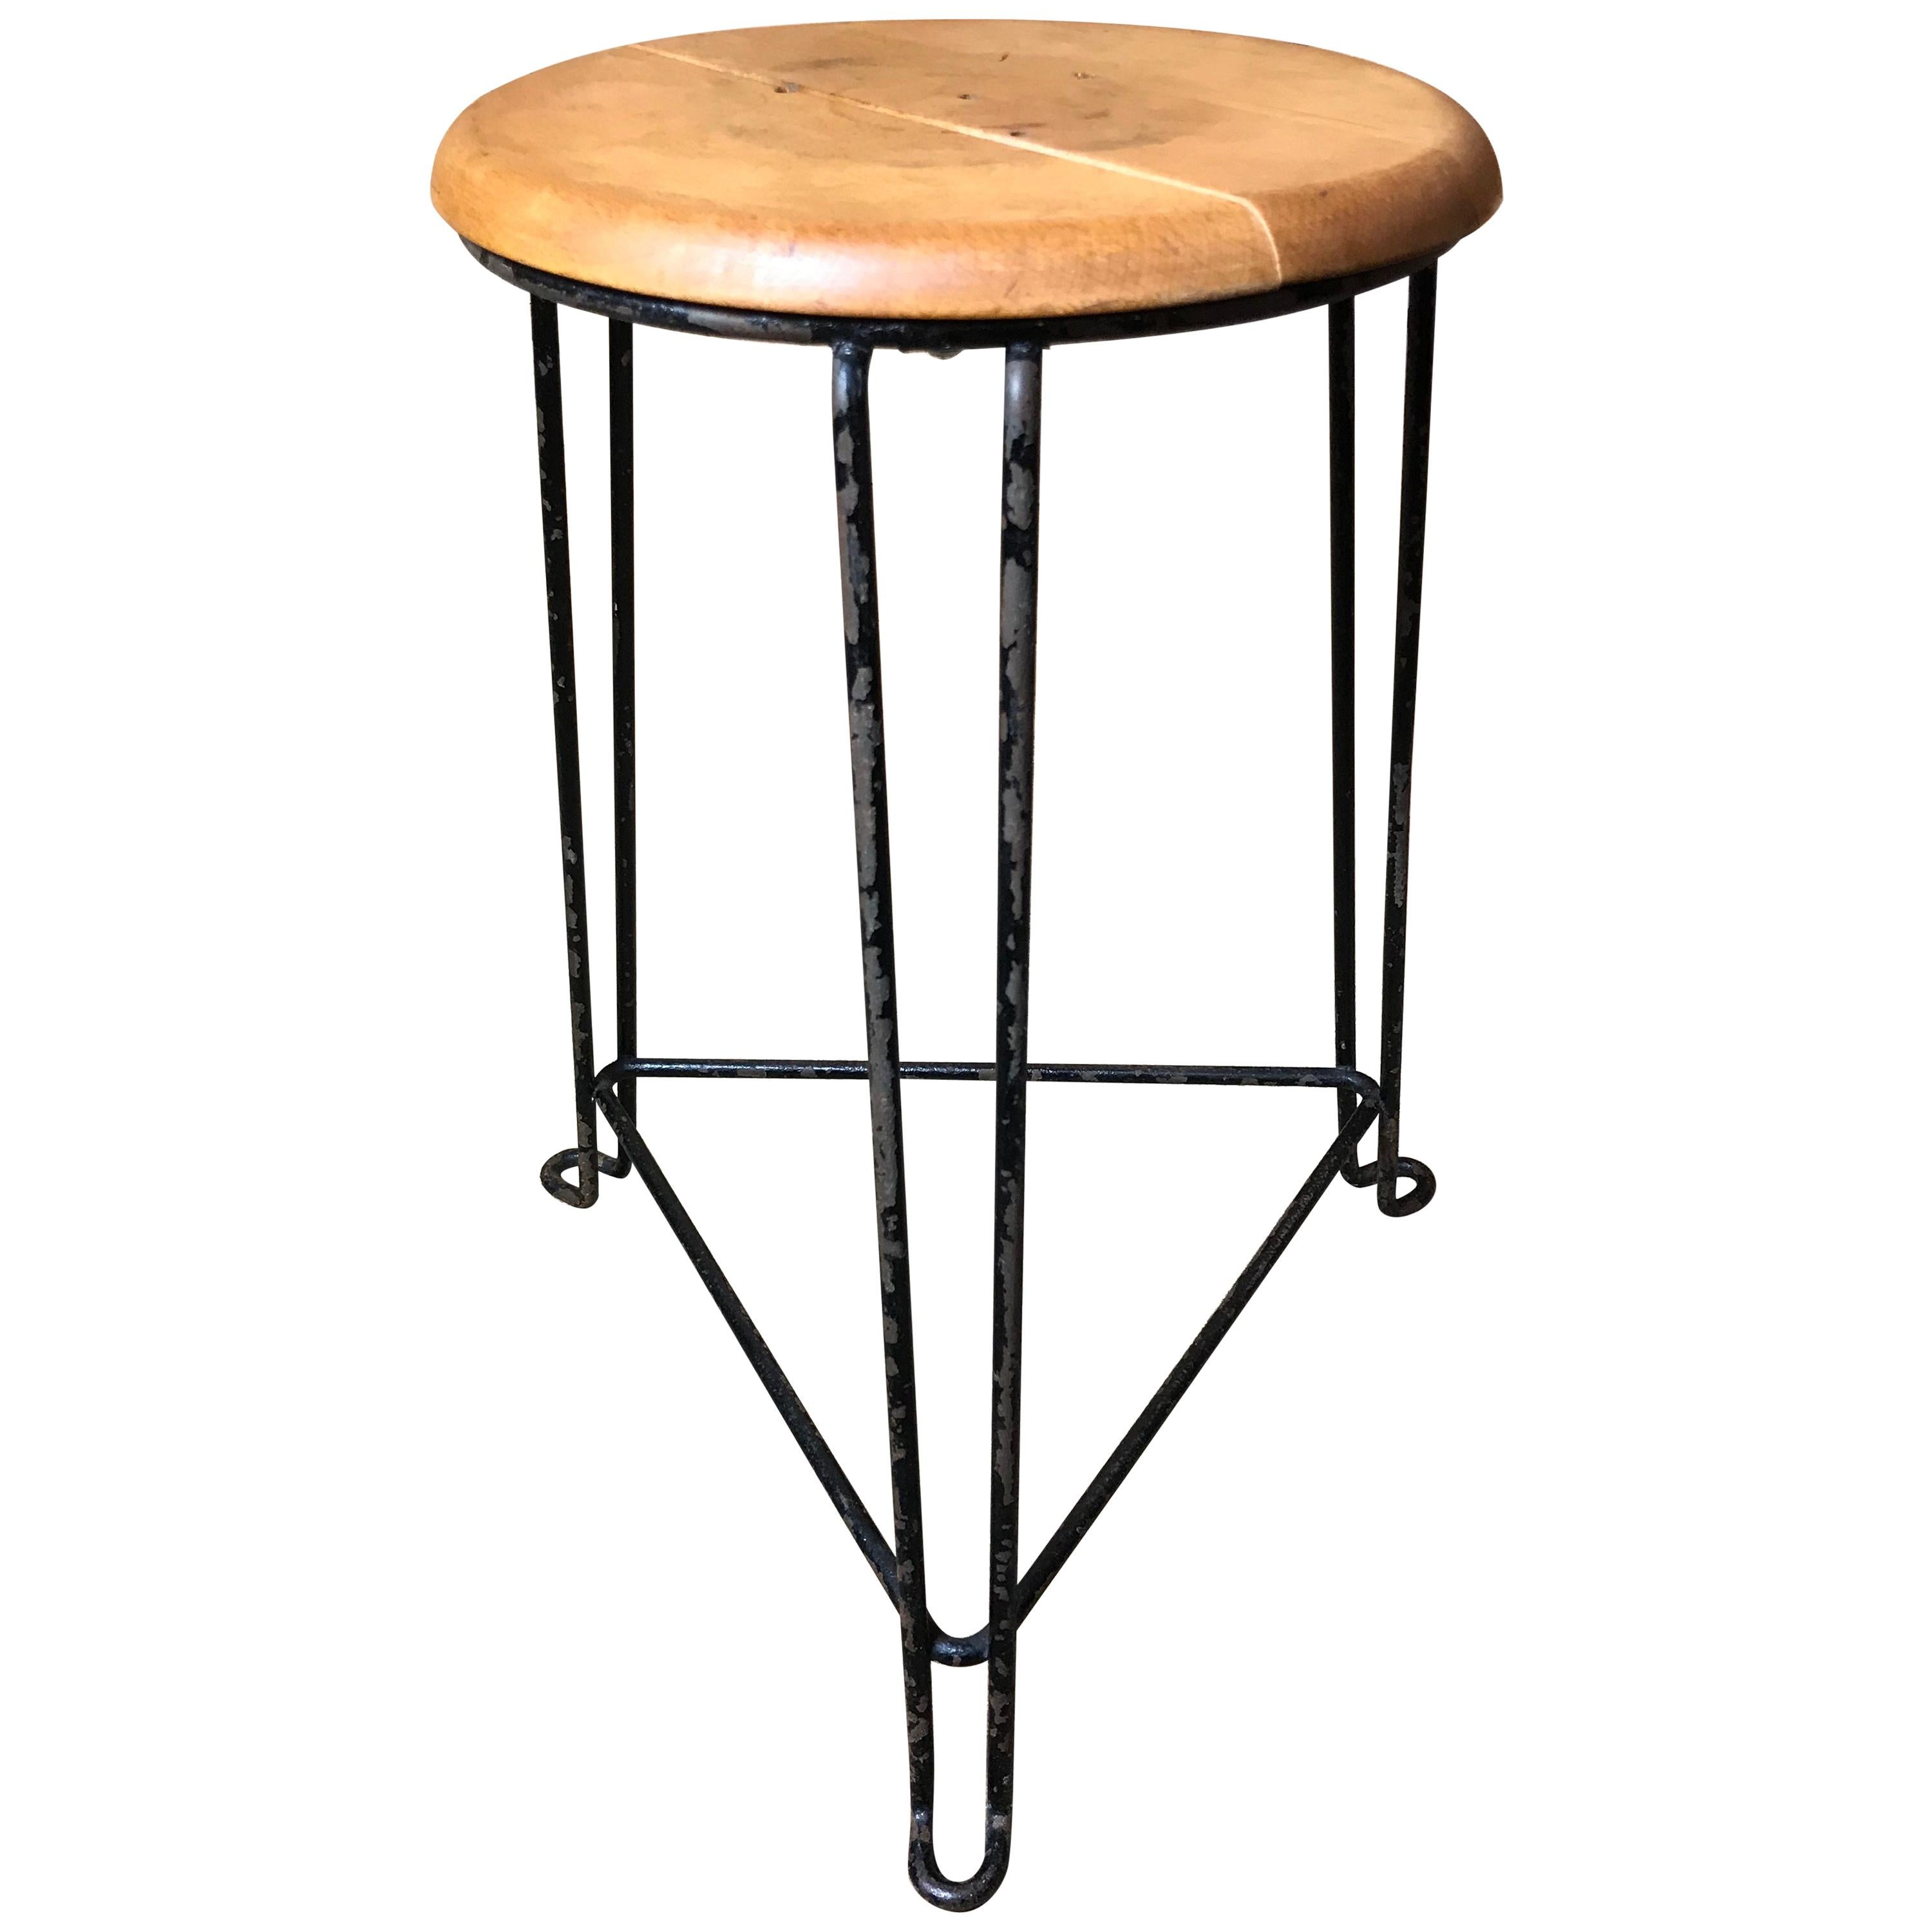 Retro 1960s Wooden Seat with Metal Frame Tomado Stool 'Clear Wooden Seat' For Sale